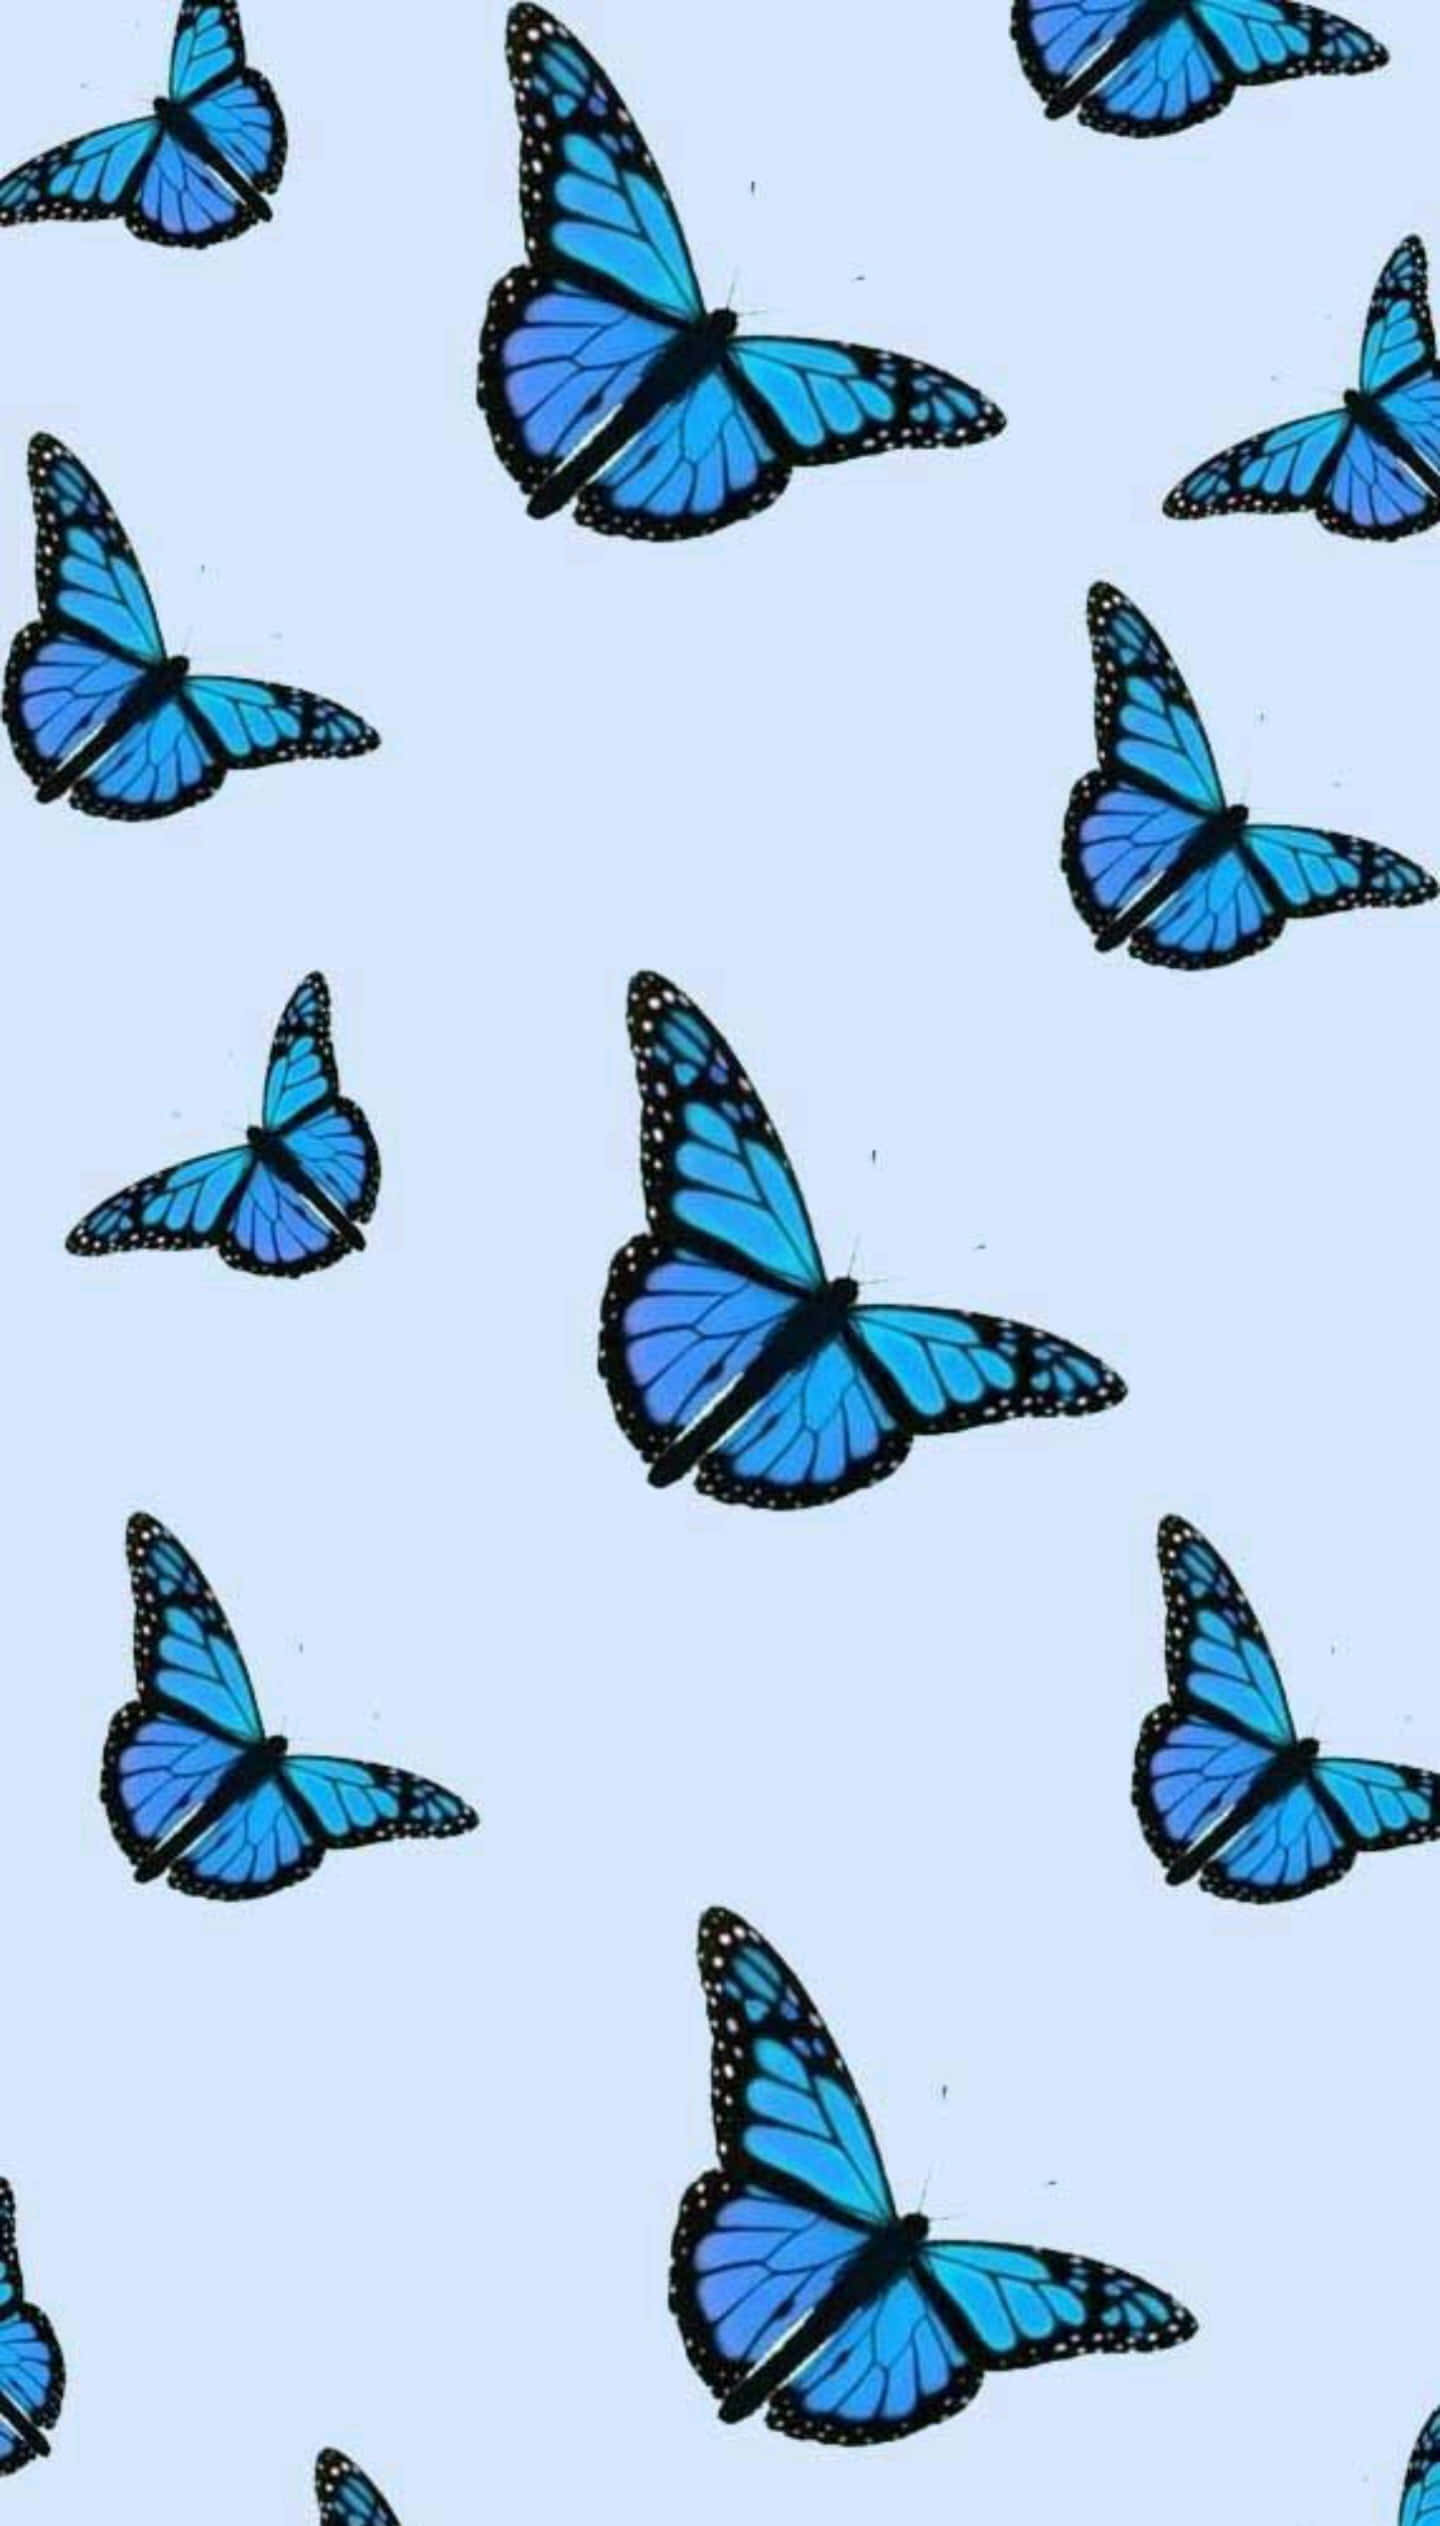 Blue Butterfly Wallpaper Images  Free Photos PNG Stickers Wallpapers   Backgrounds  rawpixel